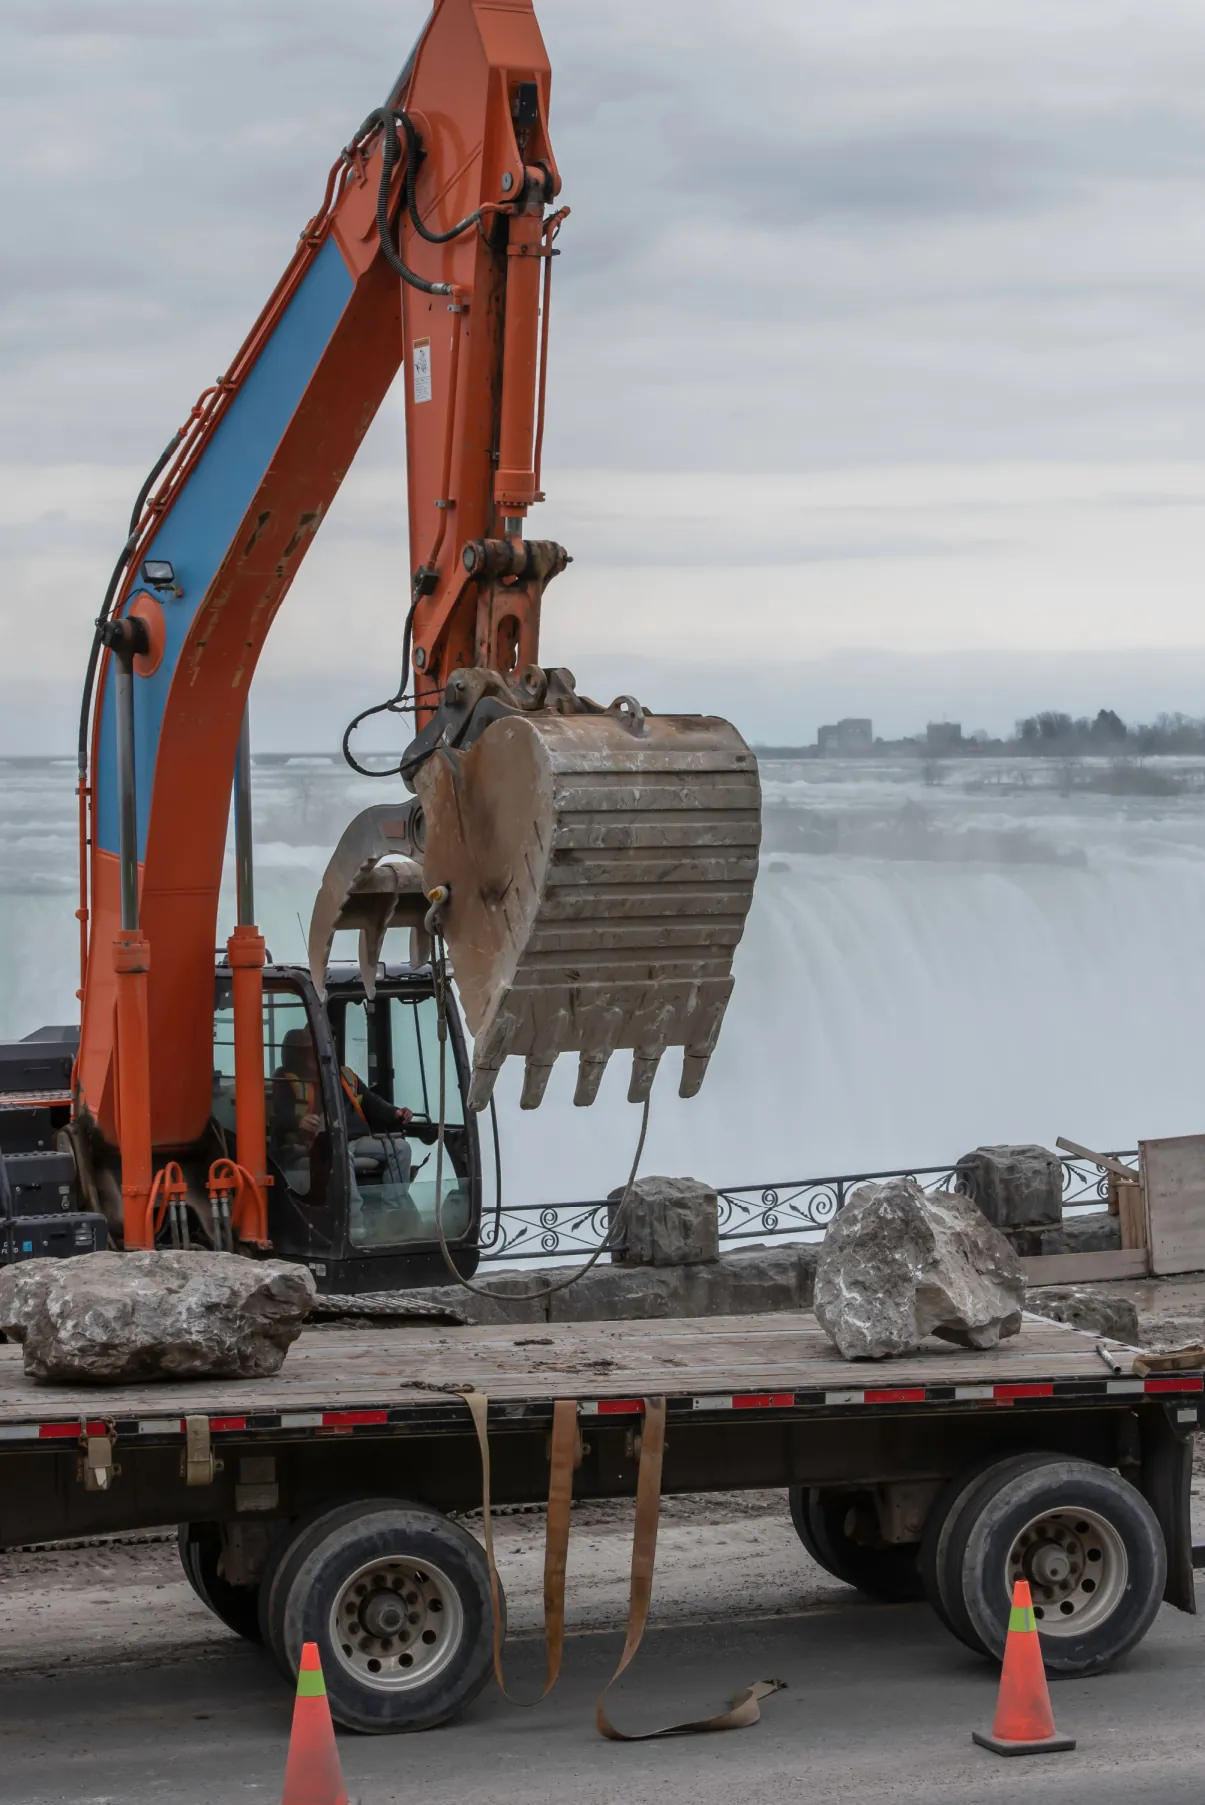 An excavator unloading large rocks from a flatbed trailer